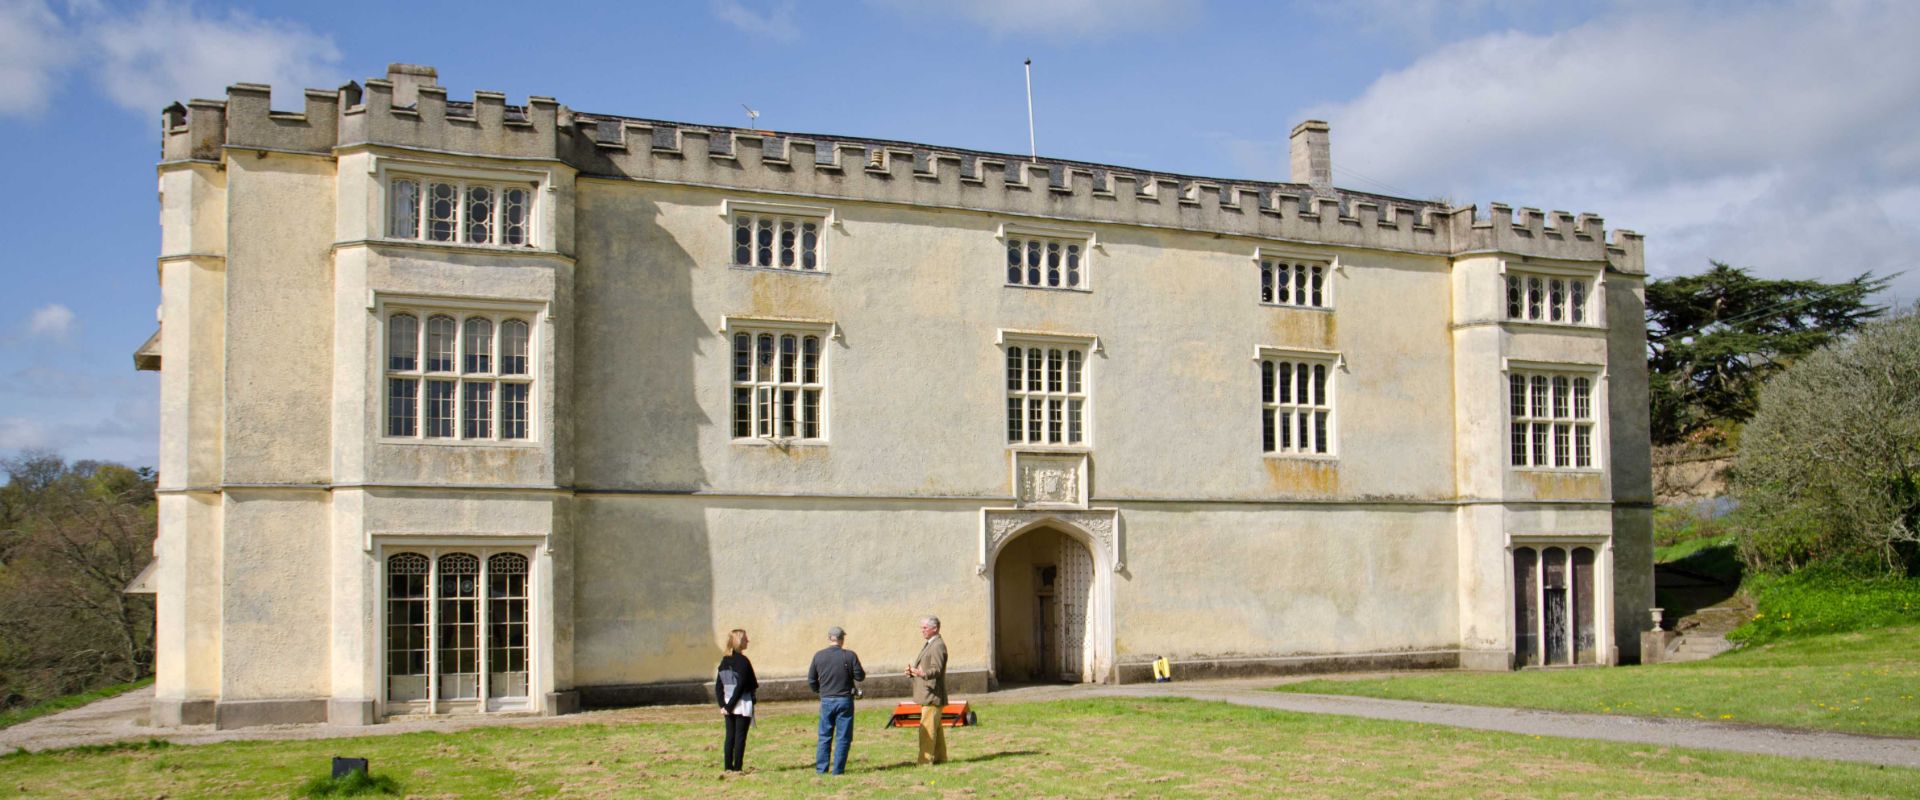 Guests on a guided tour of Great Fulford